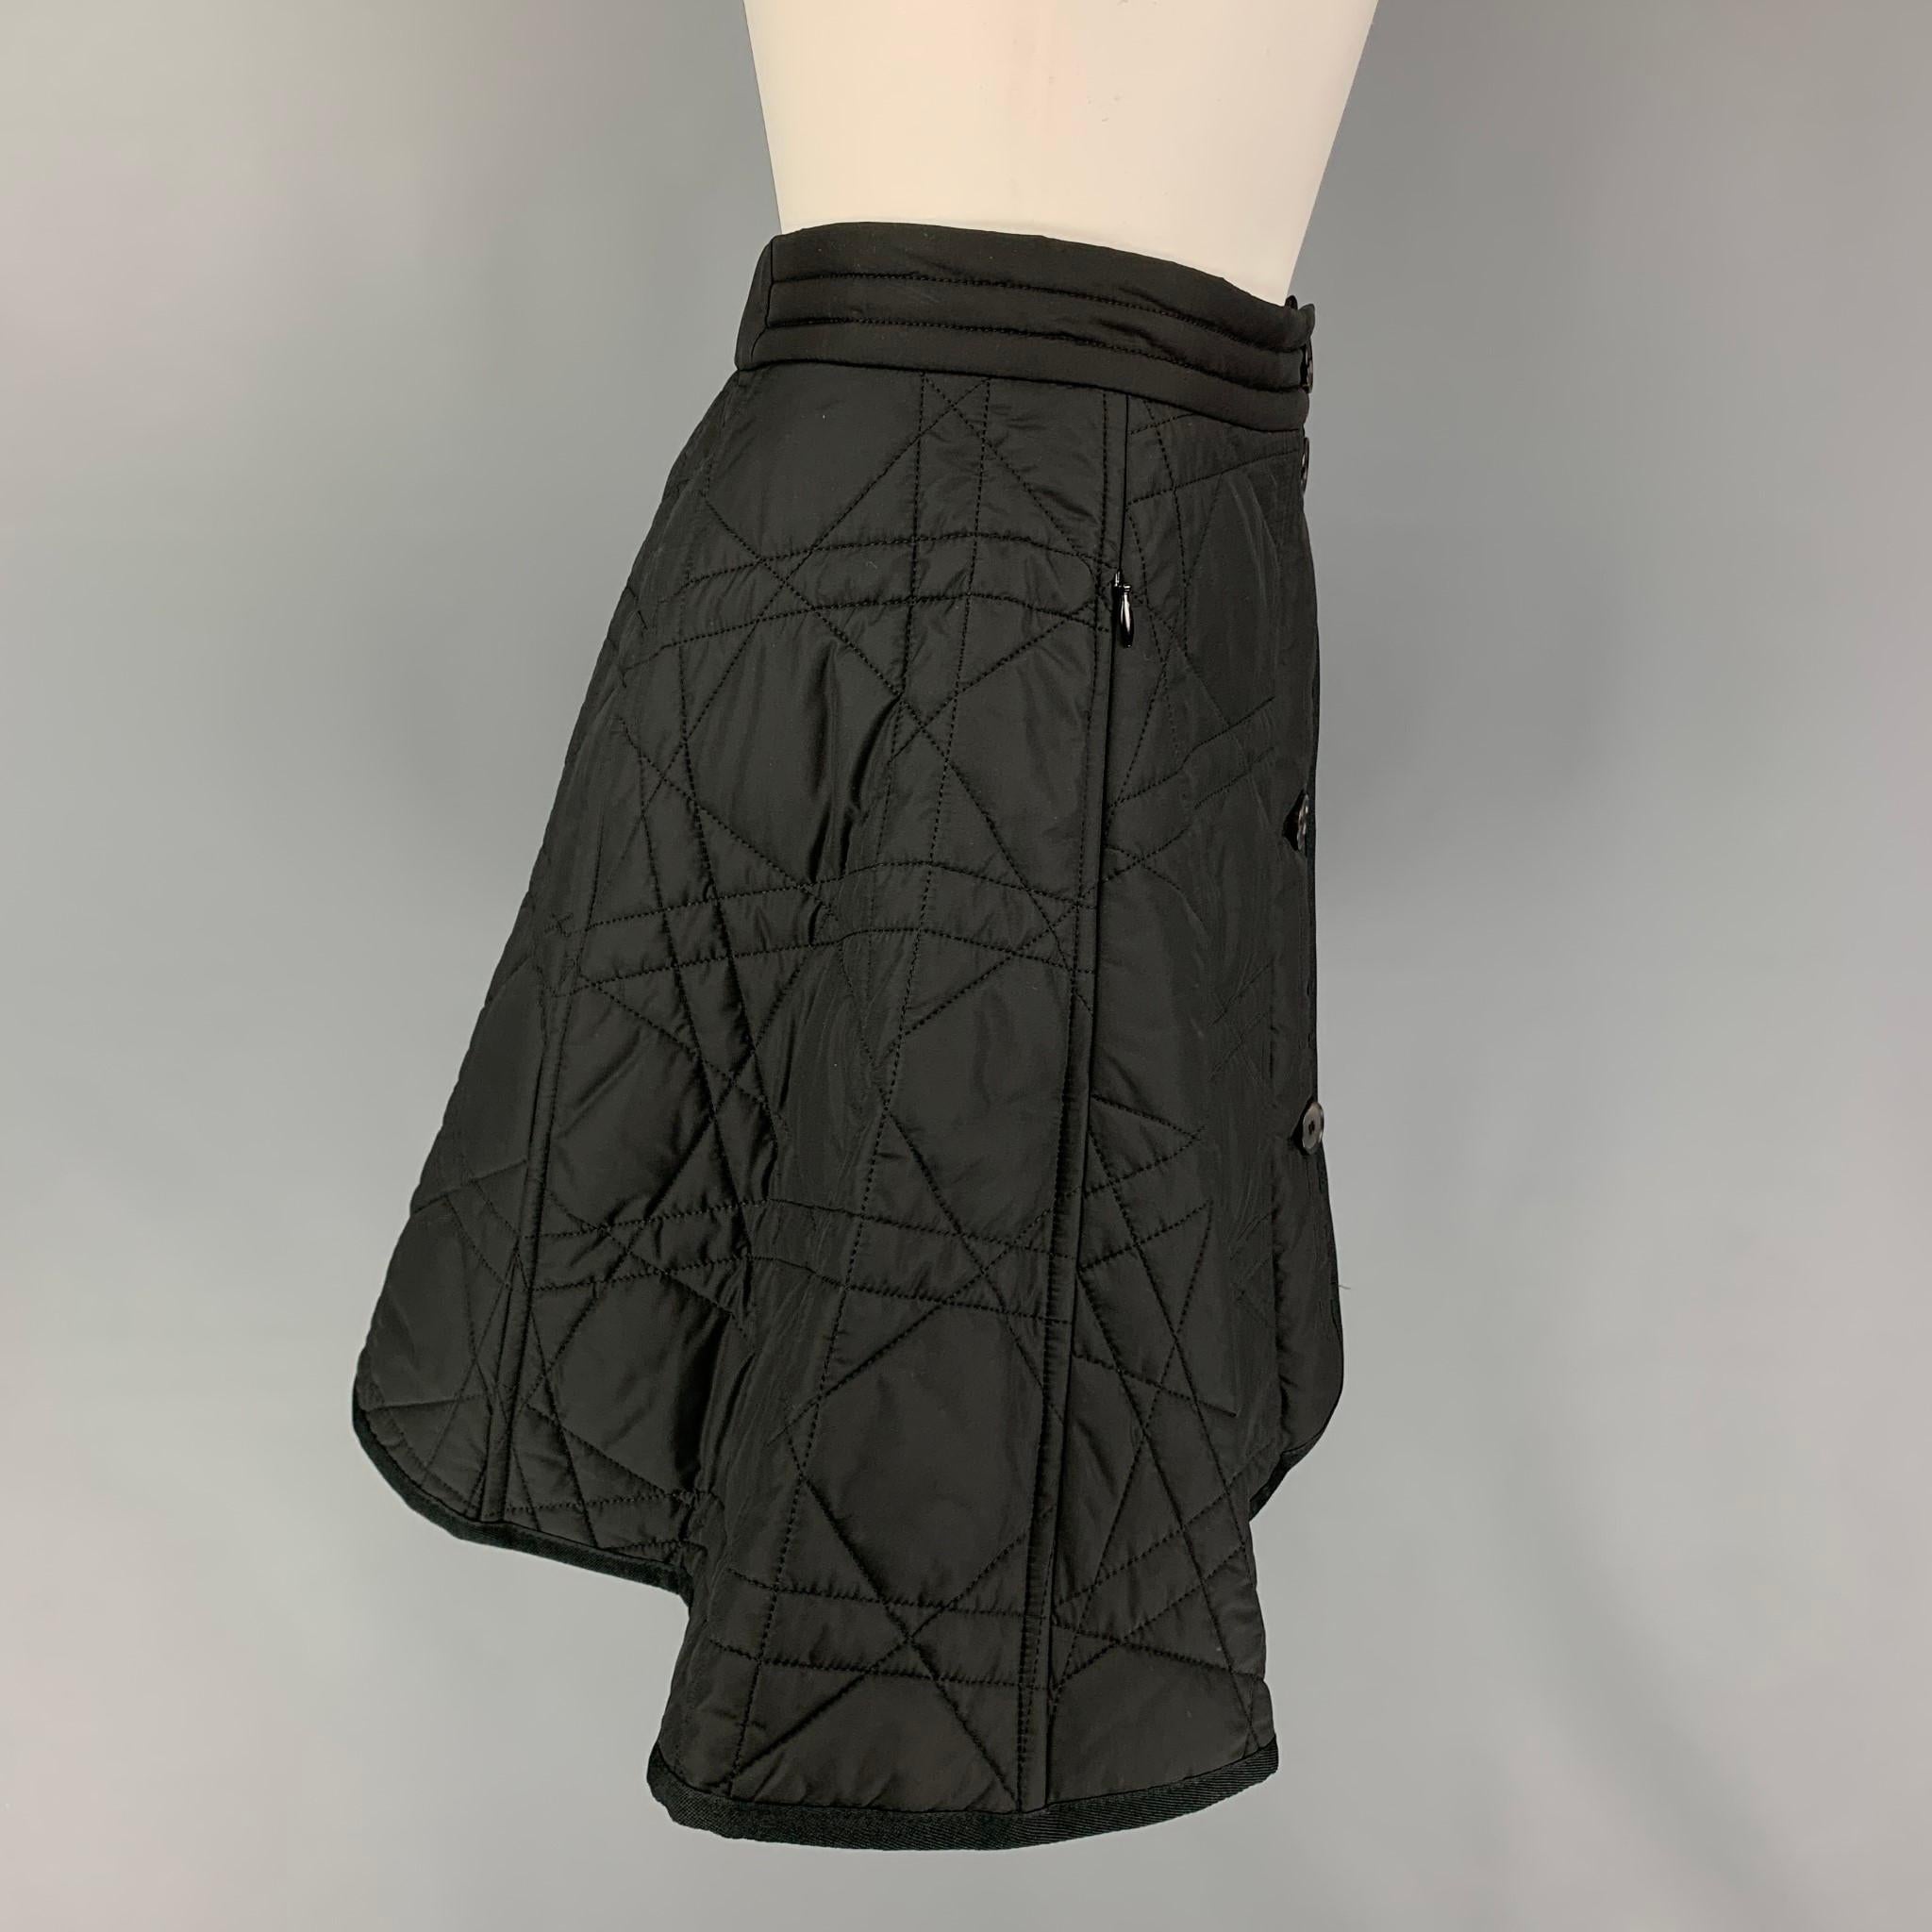 CHRISTIAN DIOR skirt comes in a black quilted polyester featuring a a-line style, zipper pockets, and a buttoned closure. Made in Italy. 

Excellent Pre-Owned Condition.
Marked: F 34 / GB 6 / I 38 / D 32 / USA 2
Original Retail Price: